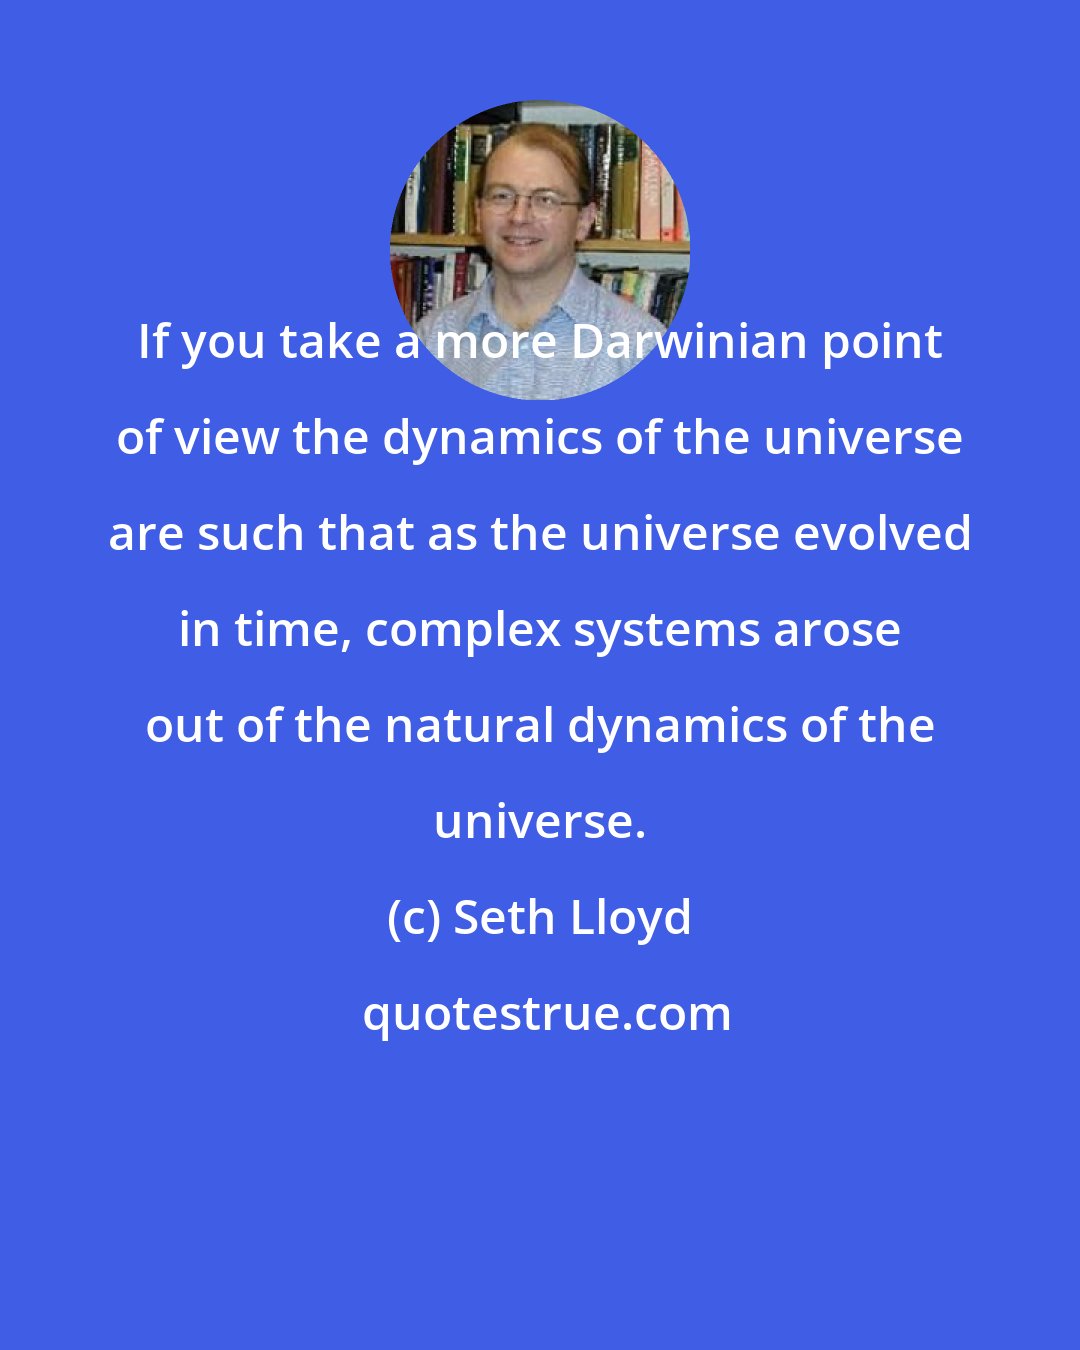 Seth Lloyd: If you take a more Darwinian point of view the dynamics of the universe are such that as the universe evolved in time, complex systems arose out of the natural dynamics of the universe.